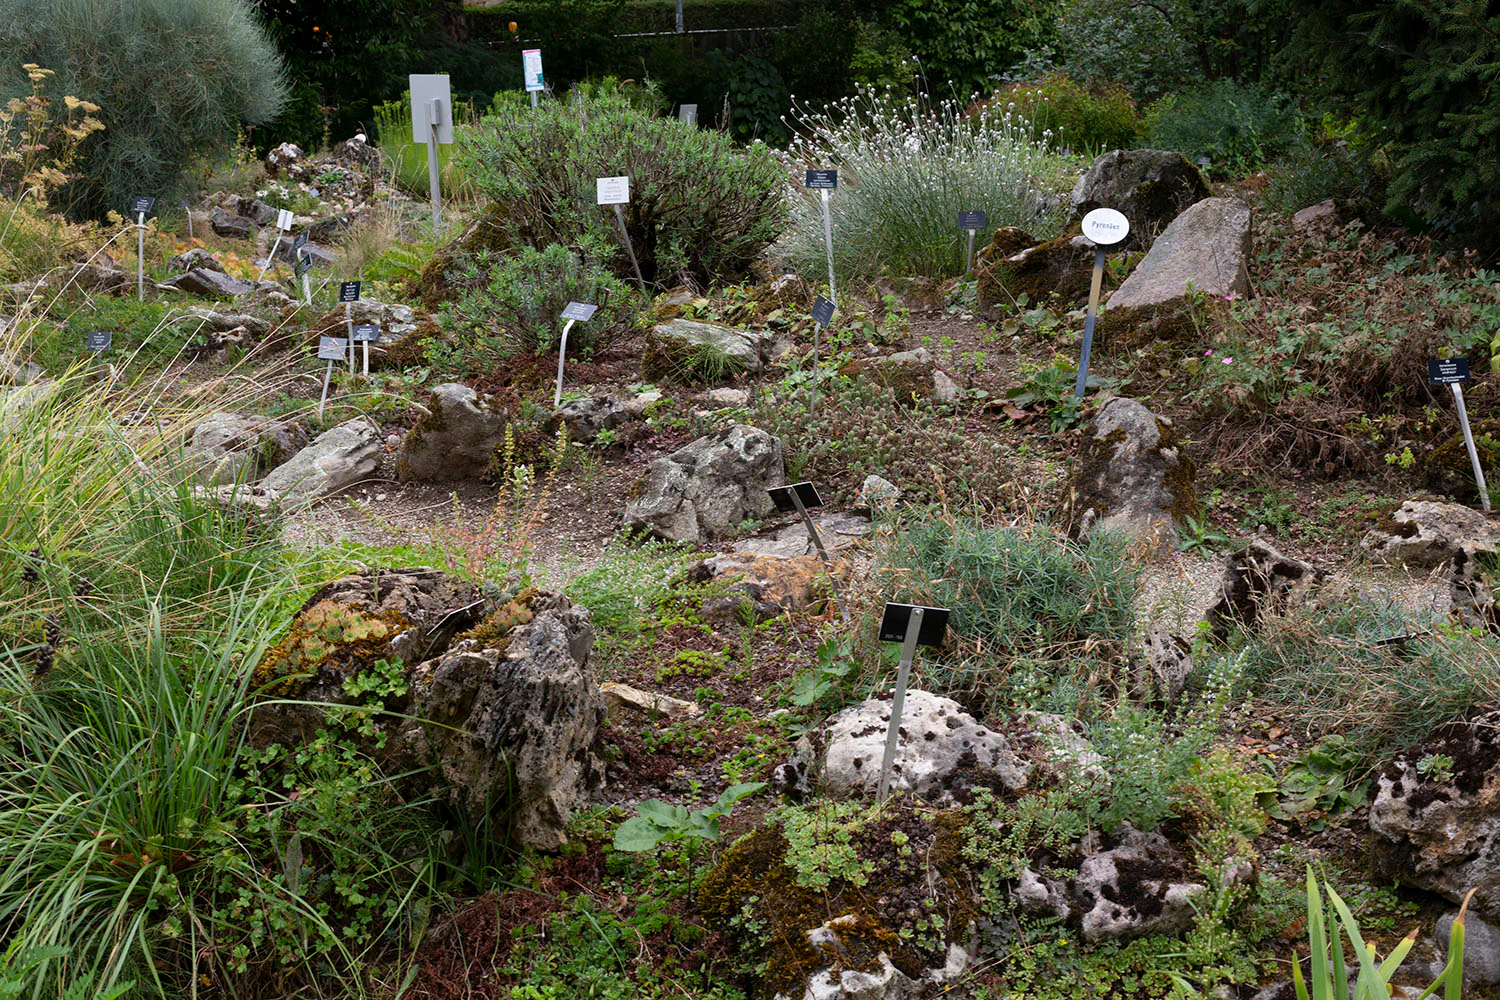 Various plants with latin name signs in Botanical Gardens Freiburg